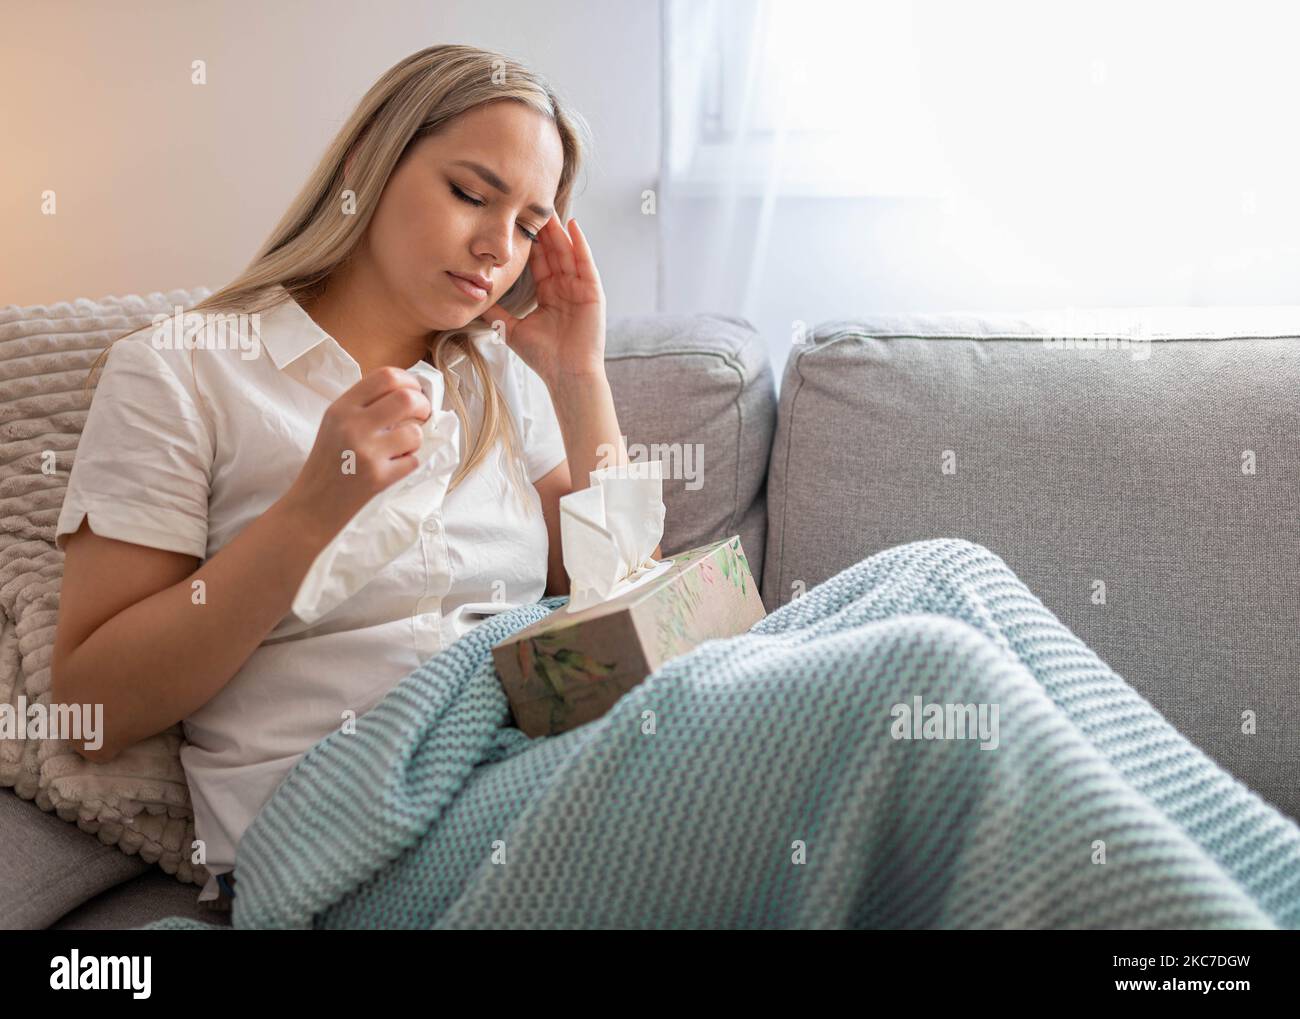 Portrait of tired young woman suffering from headache Stock Photo